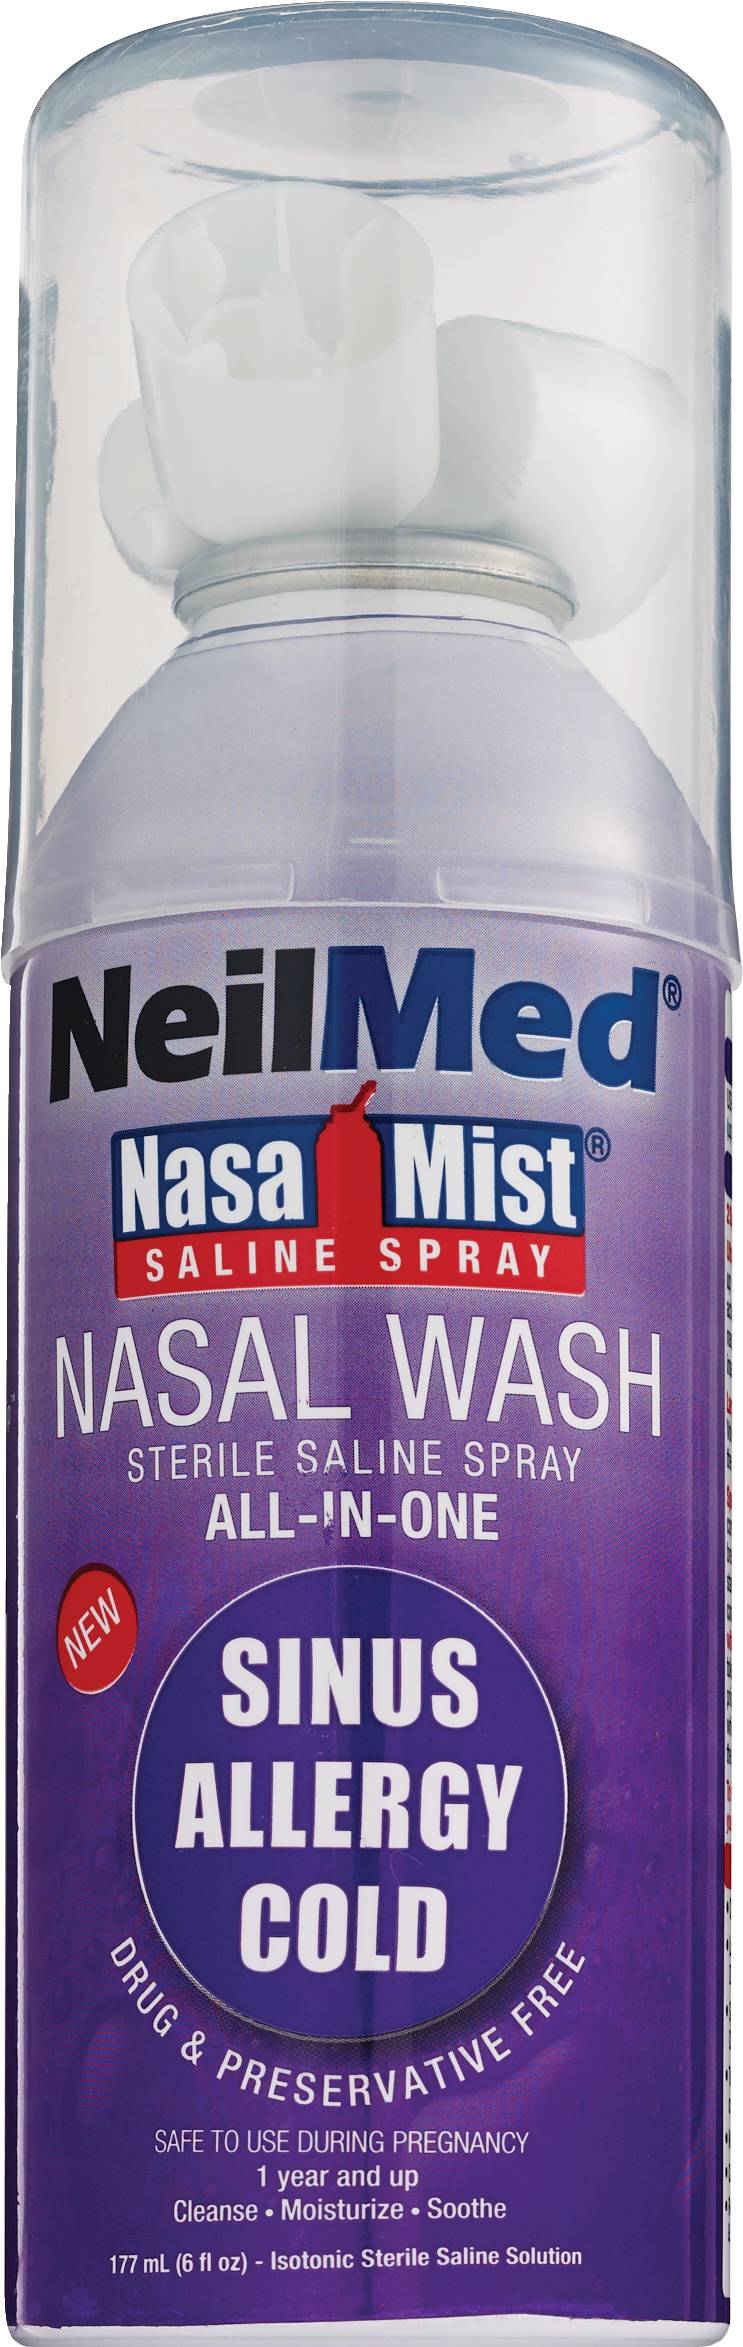 Nasamist All in One Nasal Wash